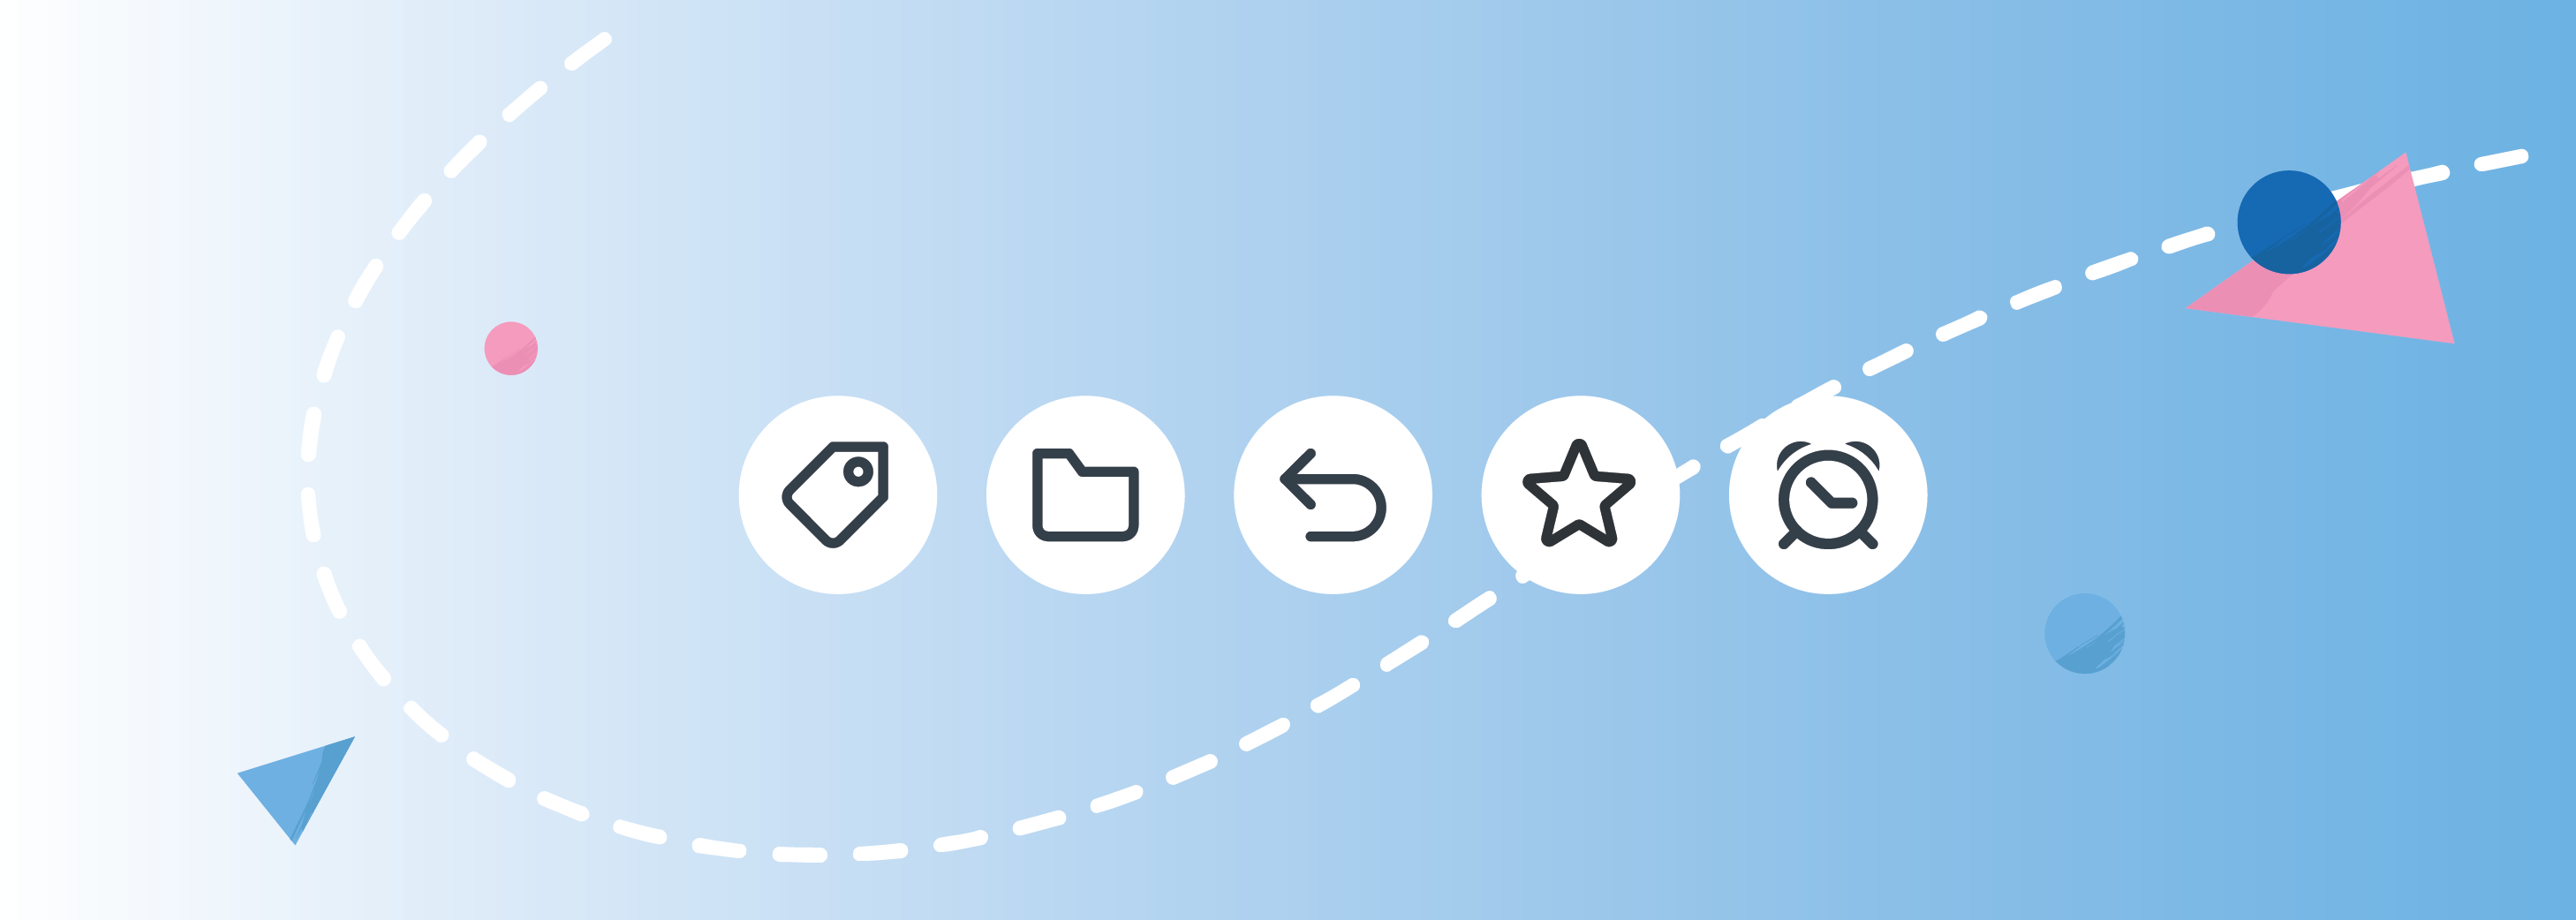 Fastmail feature icons on a light blue background